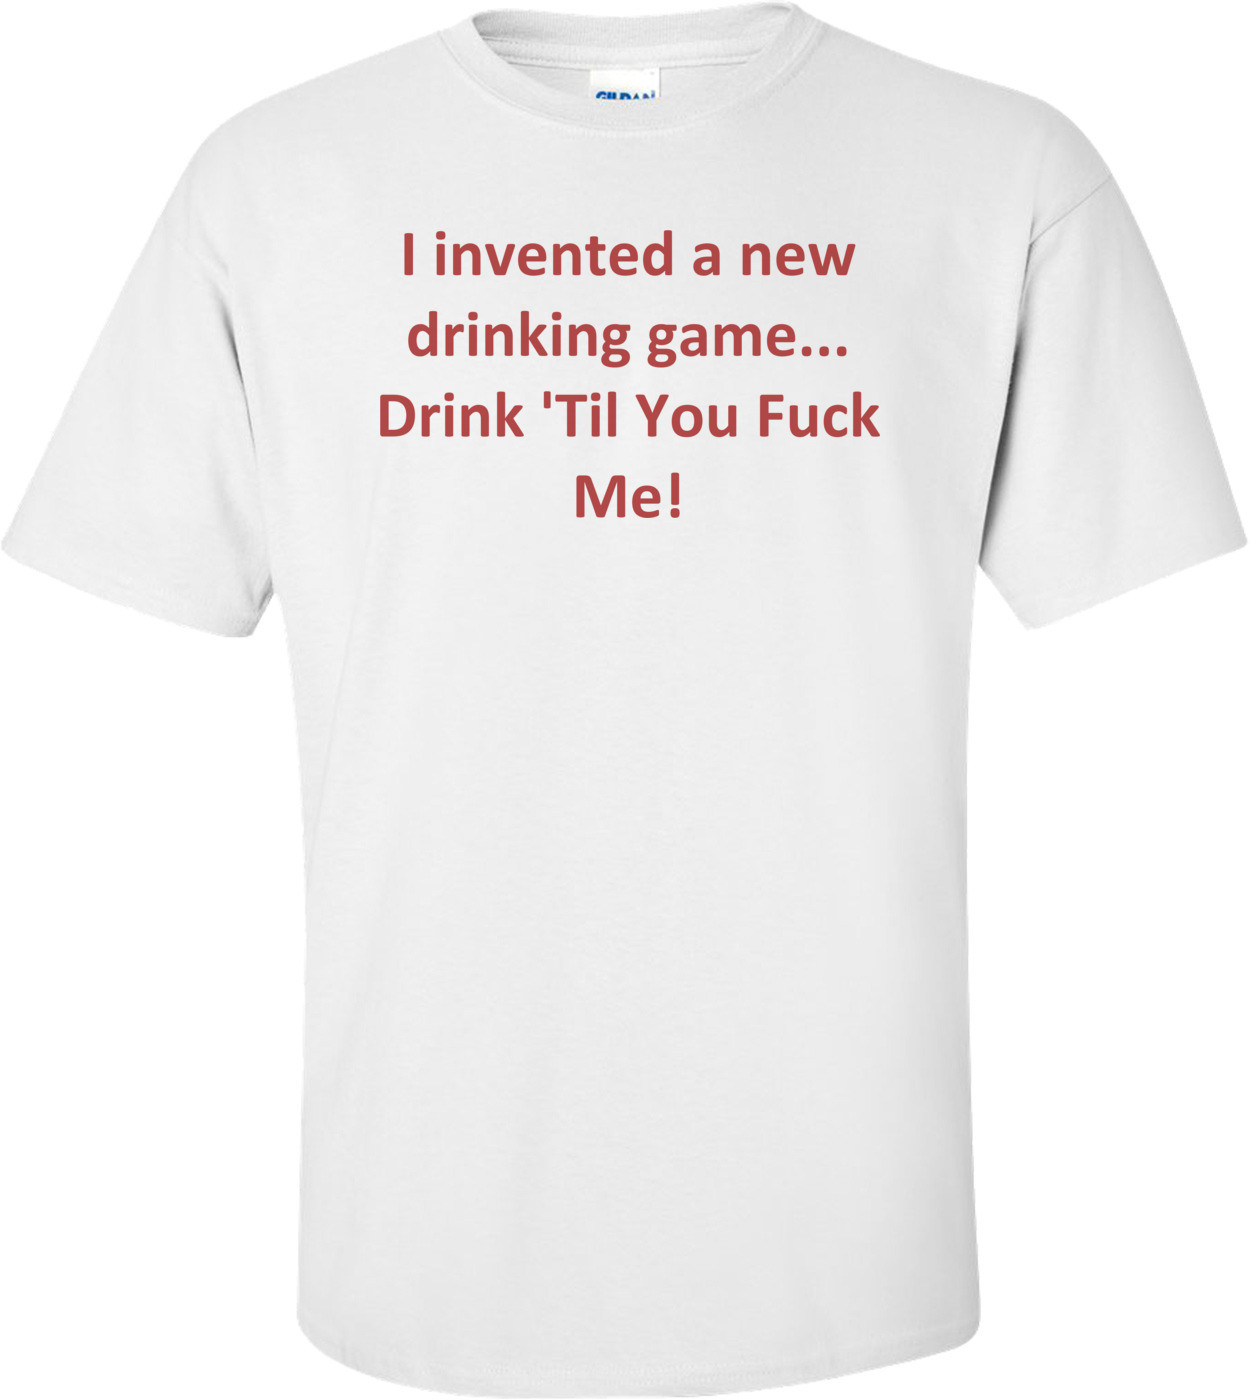 I invented a new drinking game... Drink 'Til You Fuck Me! Shirt